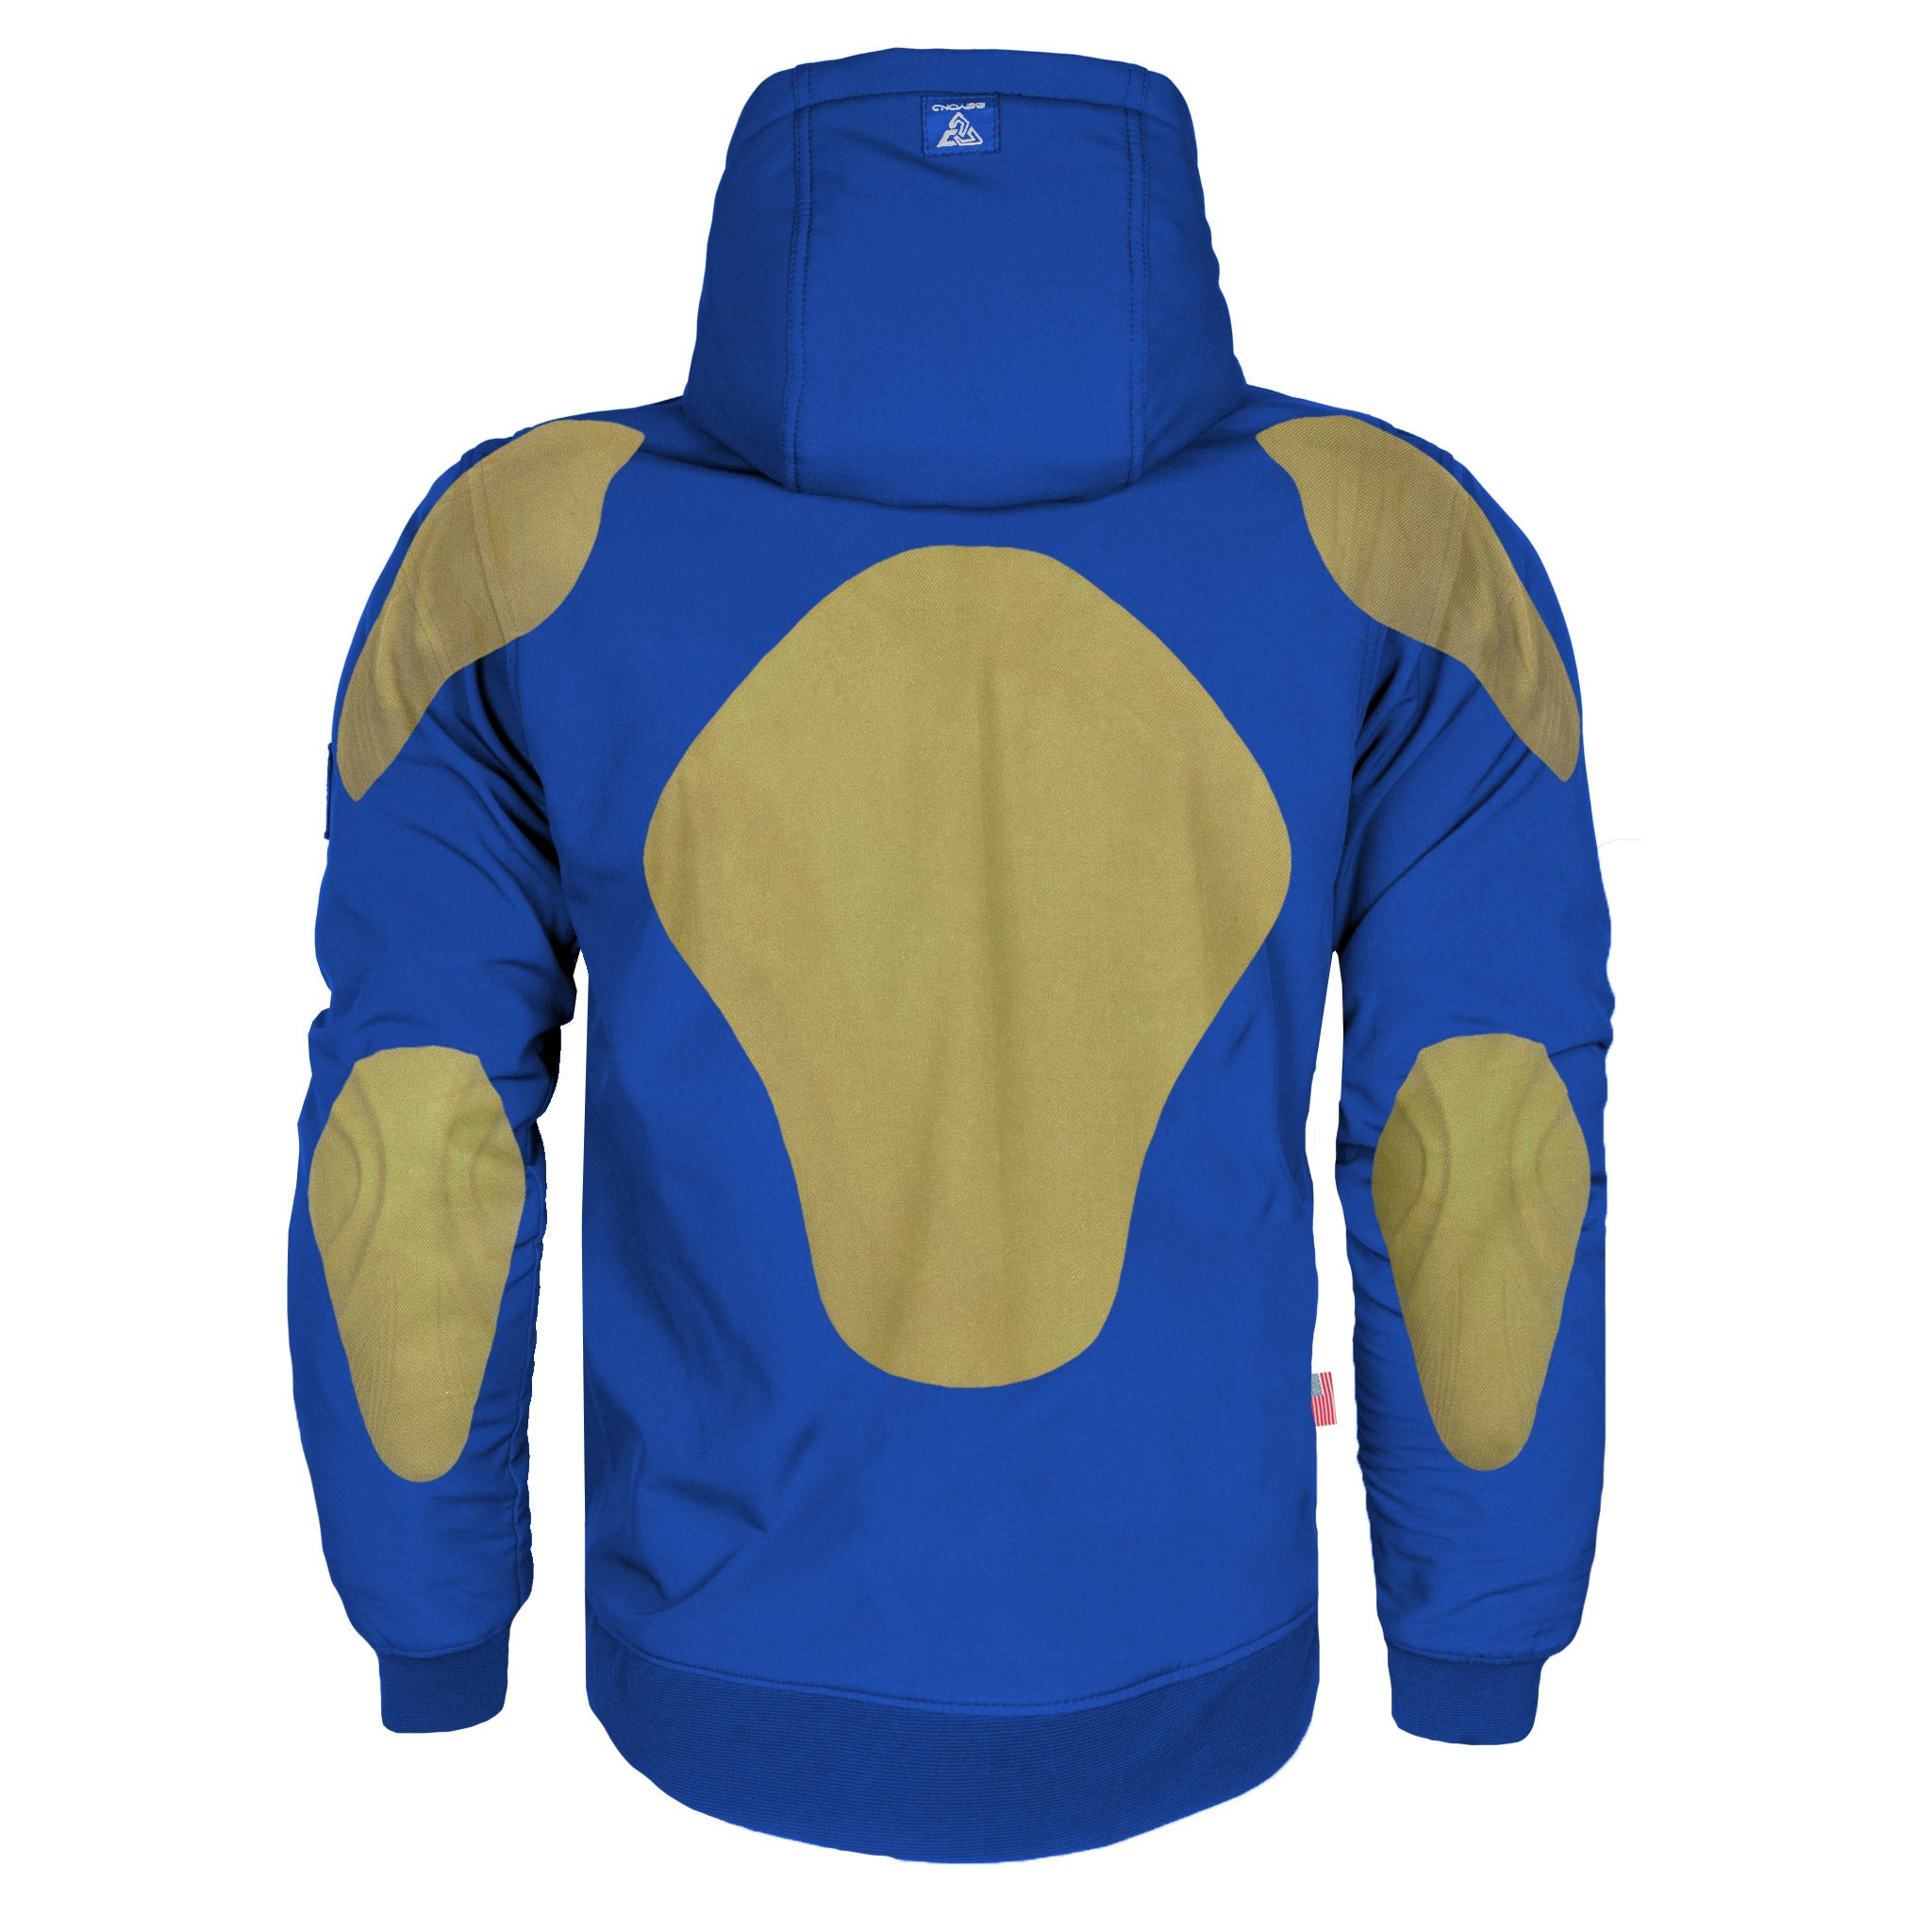 Protective SoftShell Unisex Hoodie - Royal Blue Matte with Pads